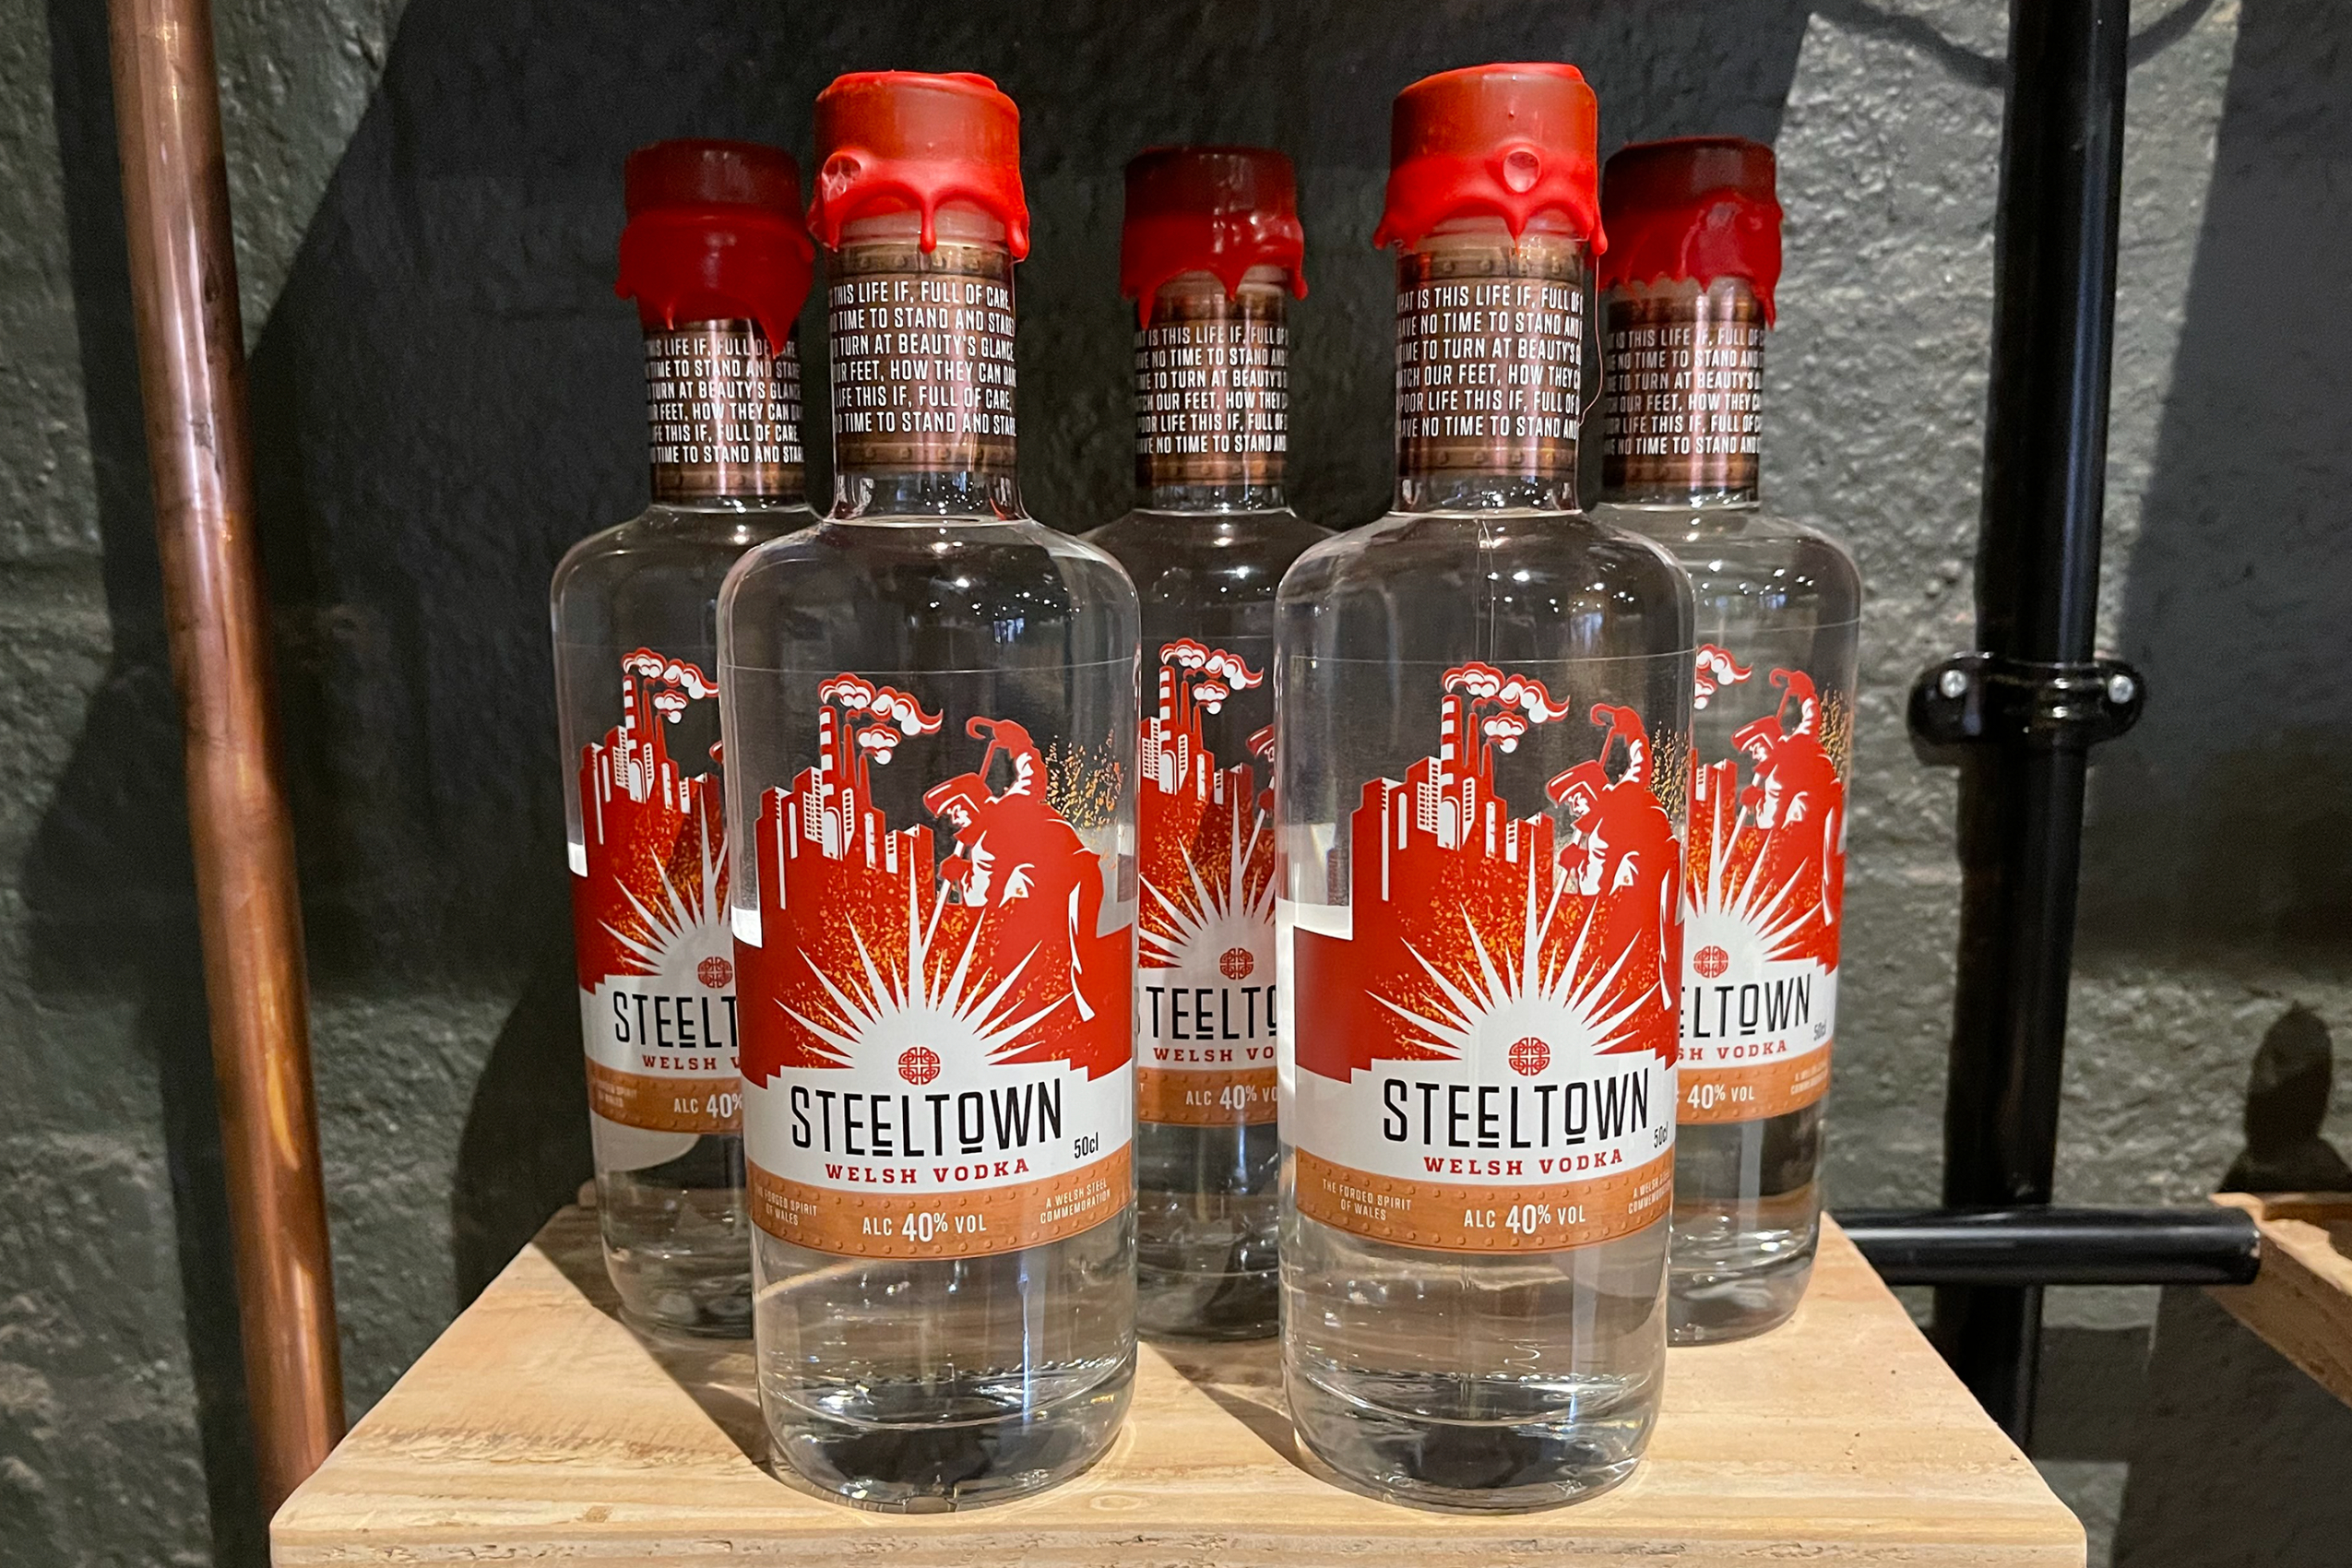 Steeltown Welsh Vodka Filtered Through Anthracite for a Crisp, Clean Flavour from the Spirit of Wales Distillery in Newport, South Wales